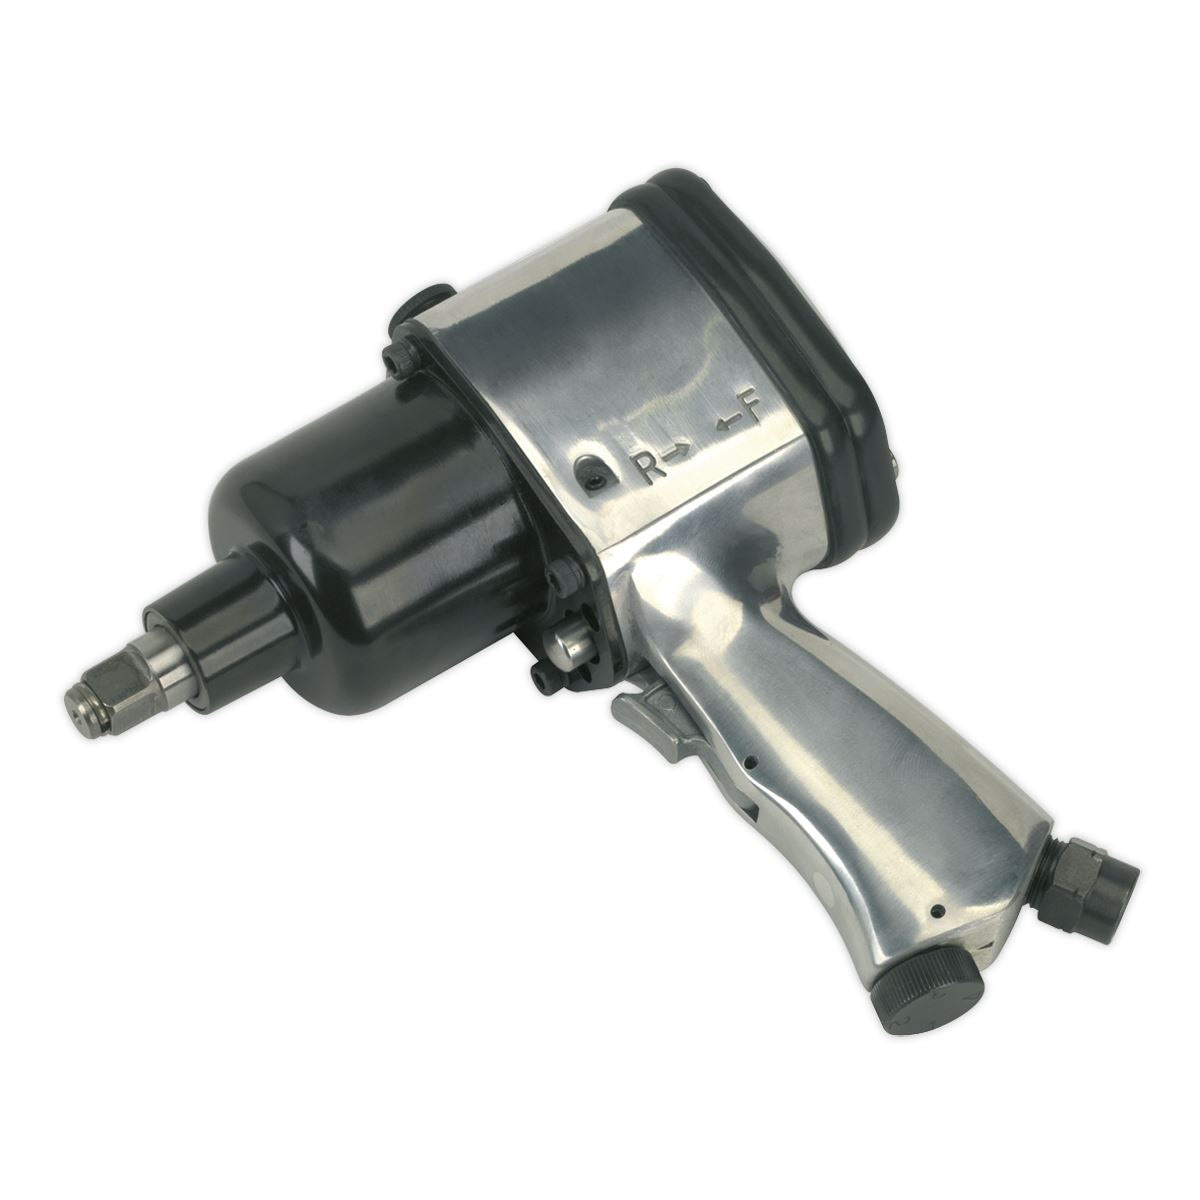 Sealey Premier Air Impact Wrench 1/2"Sq Drive Extra-Heavy-Duty